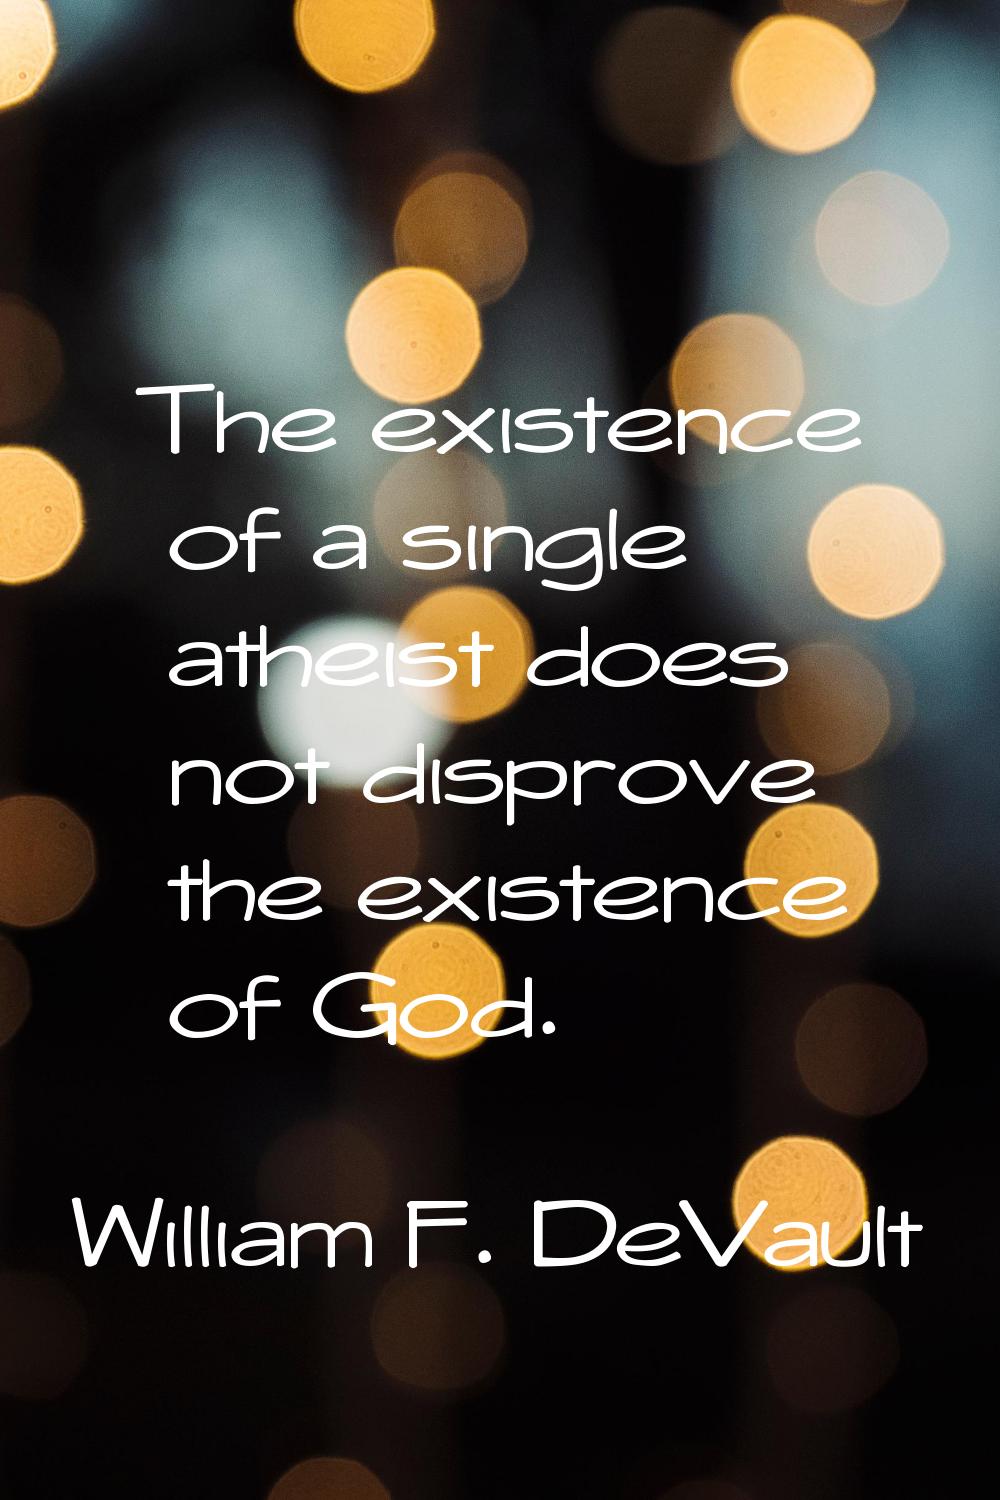 The existence of a single atheist does not disprove the existence of God.